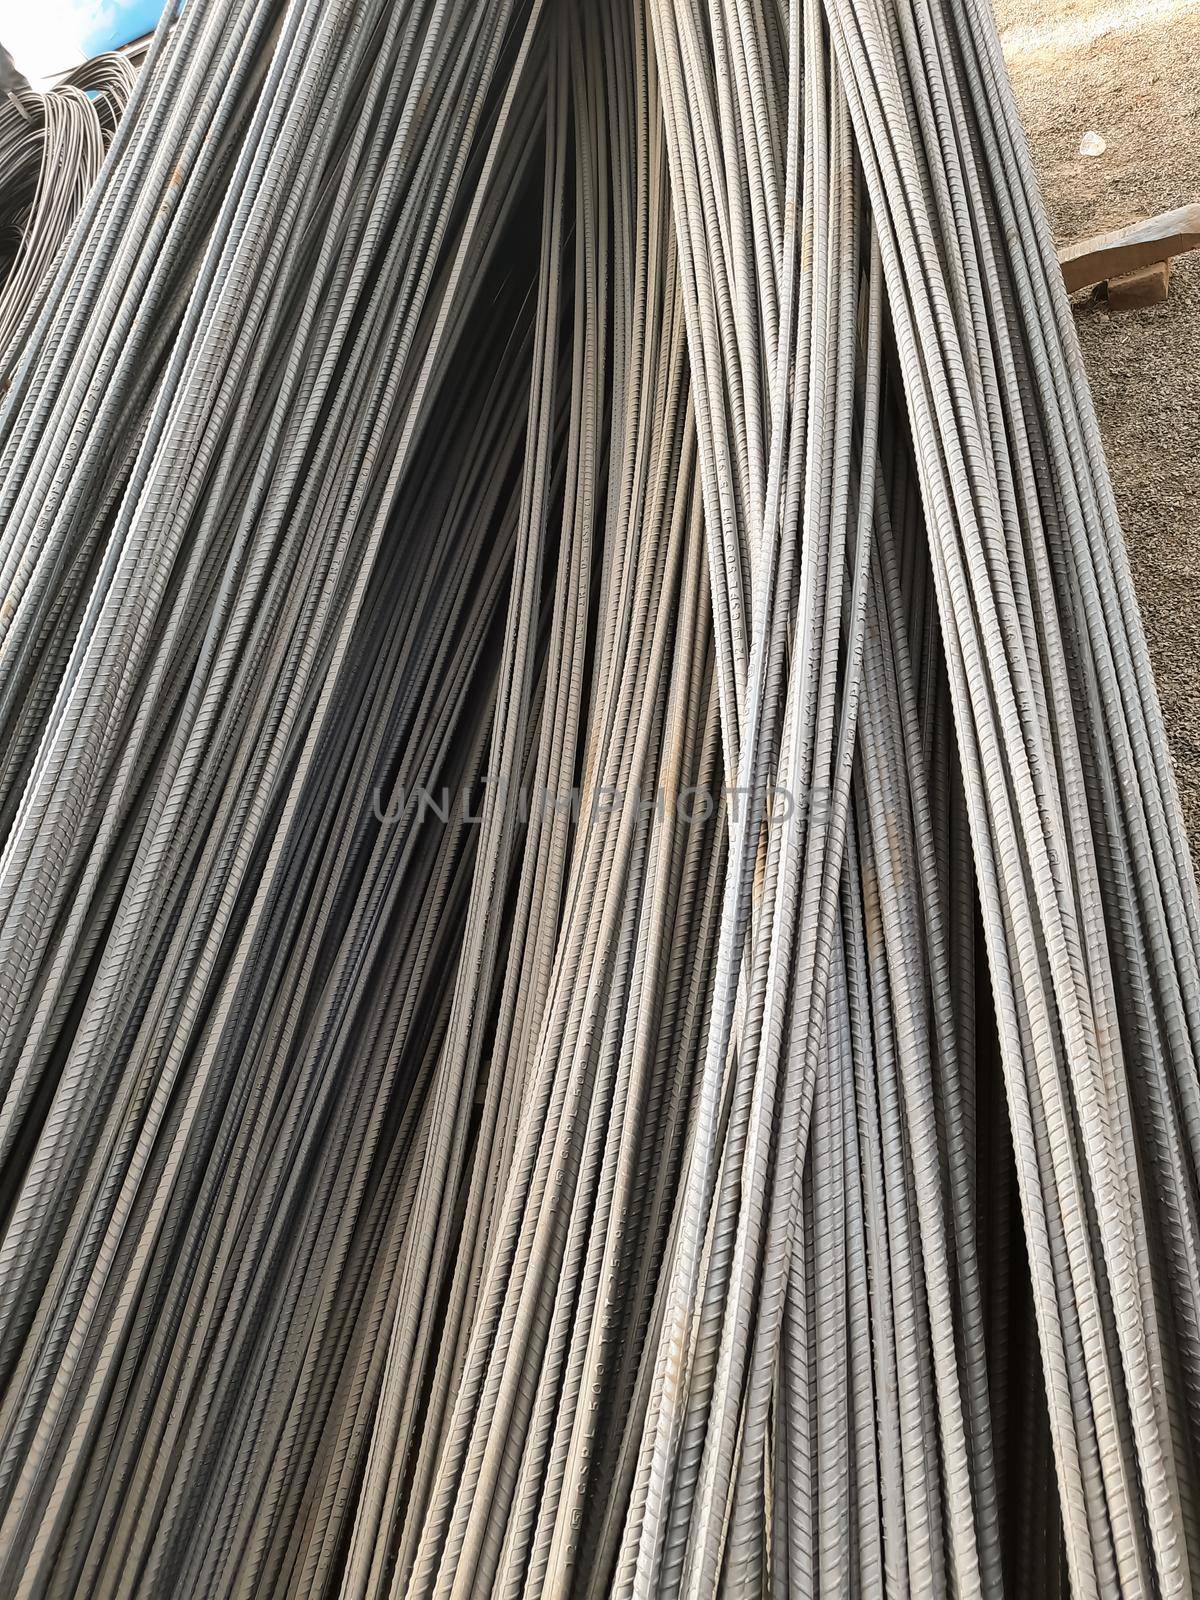 Steel bar, Steel construction, Steel industry background. by tabishere